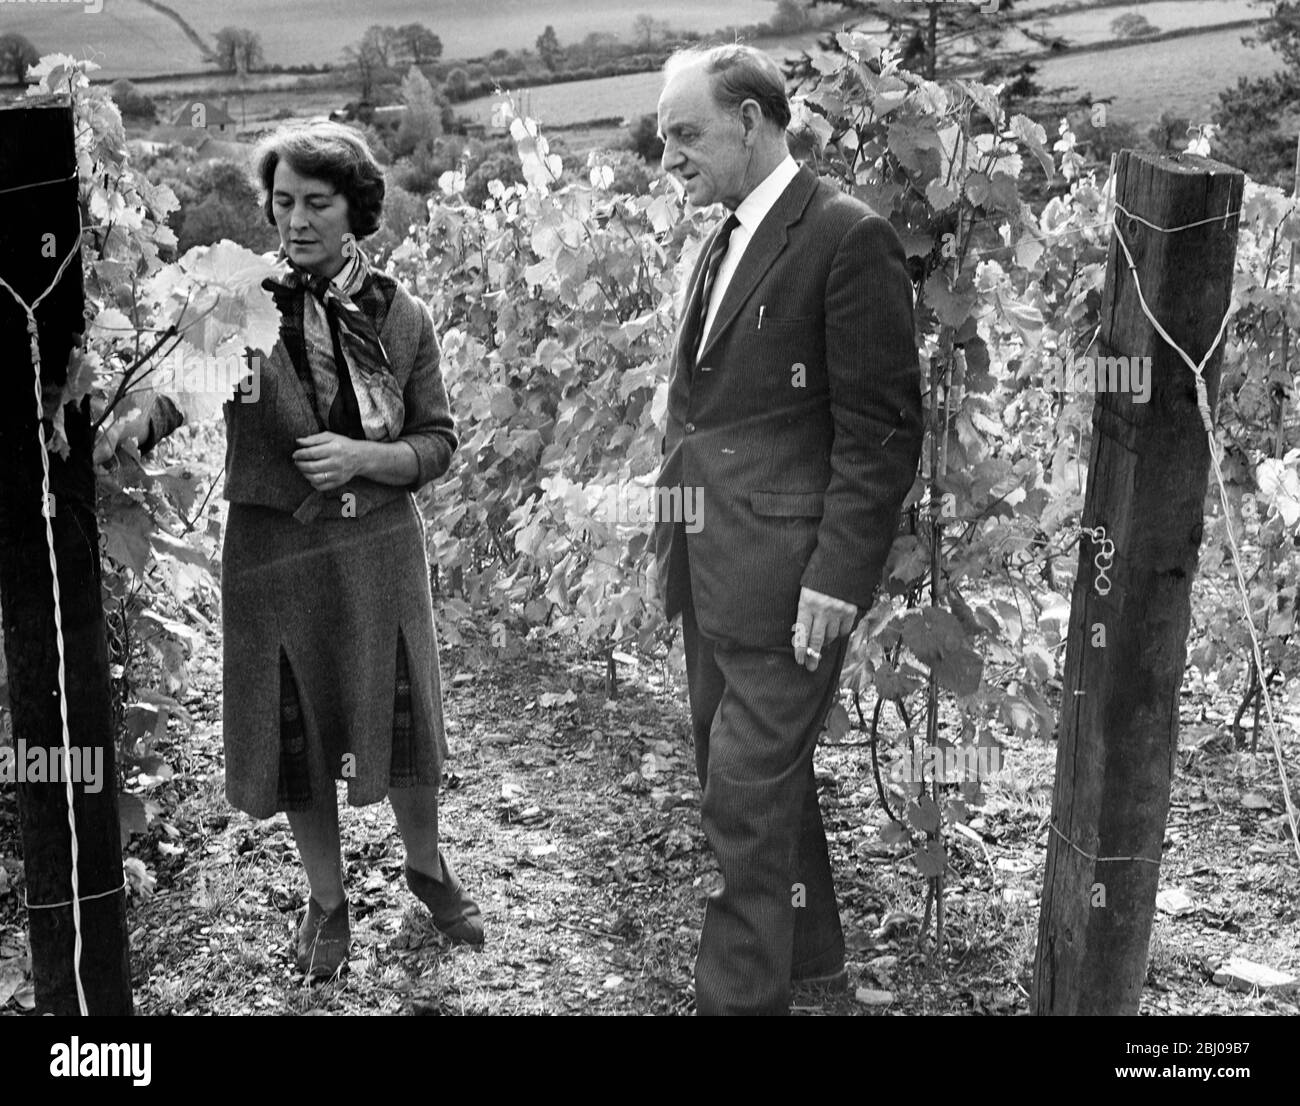 Picture shows: Mr Swilynn Jones inspects the vines with Mrs Reynolds. On a Vineyard near Carmarthen, Wales. Stock Photo